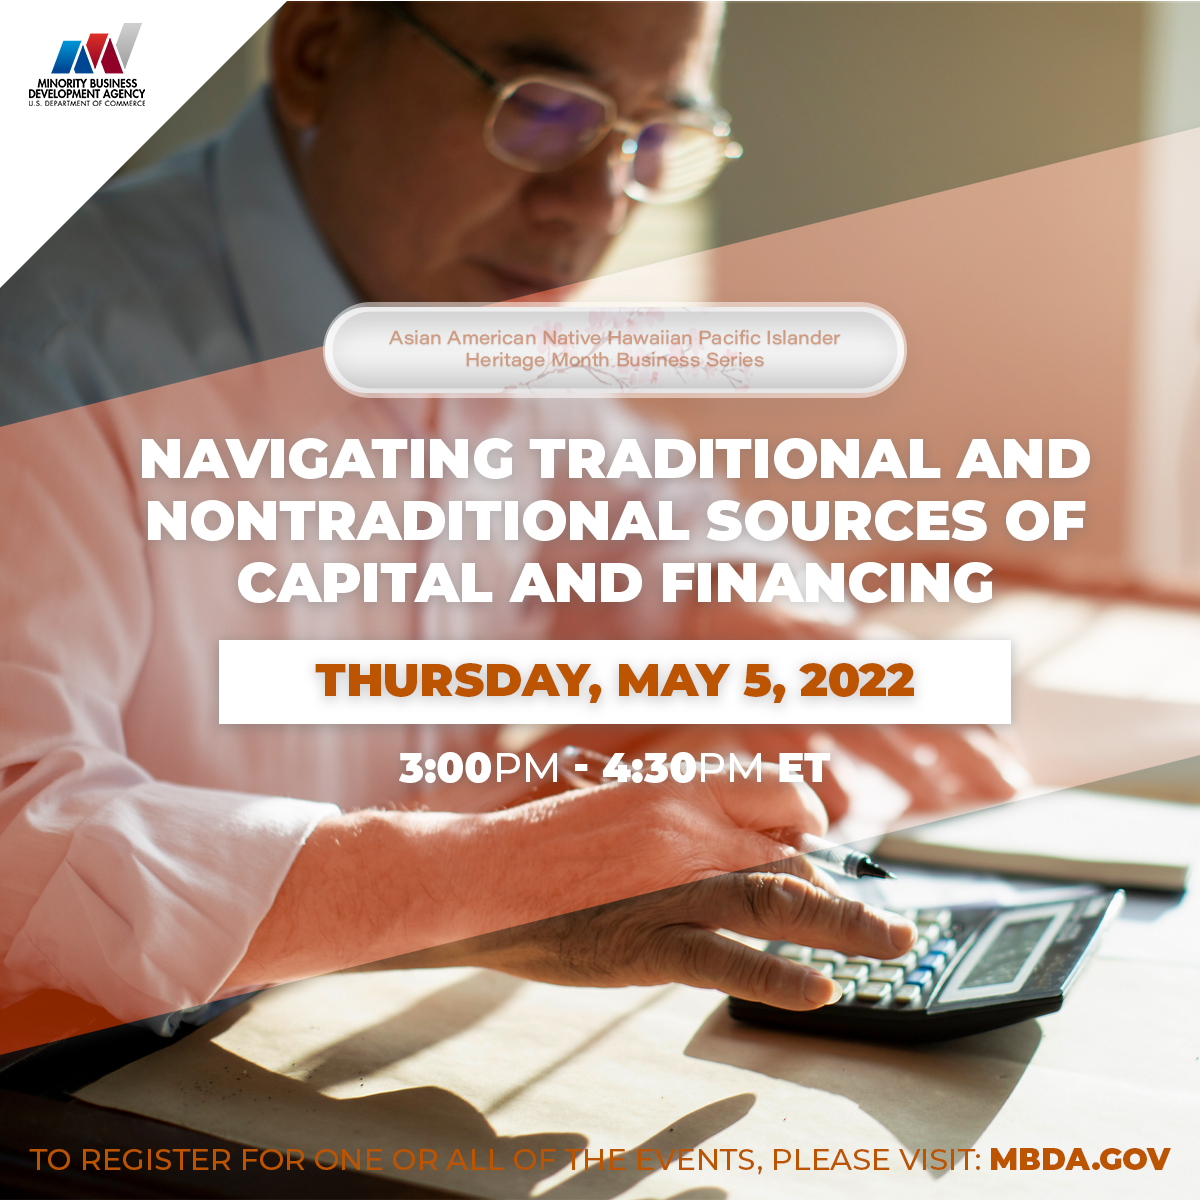 Navigating Traditional and Nontraditional Sources of Capital and Financing